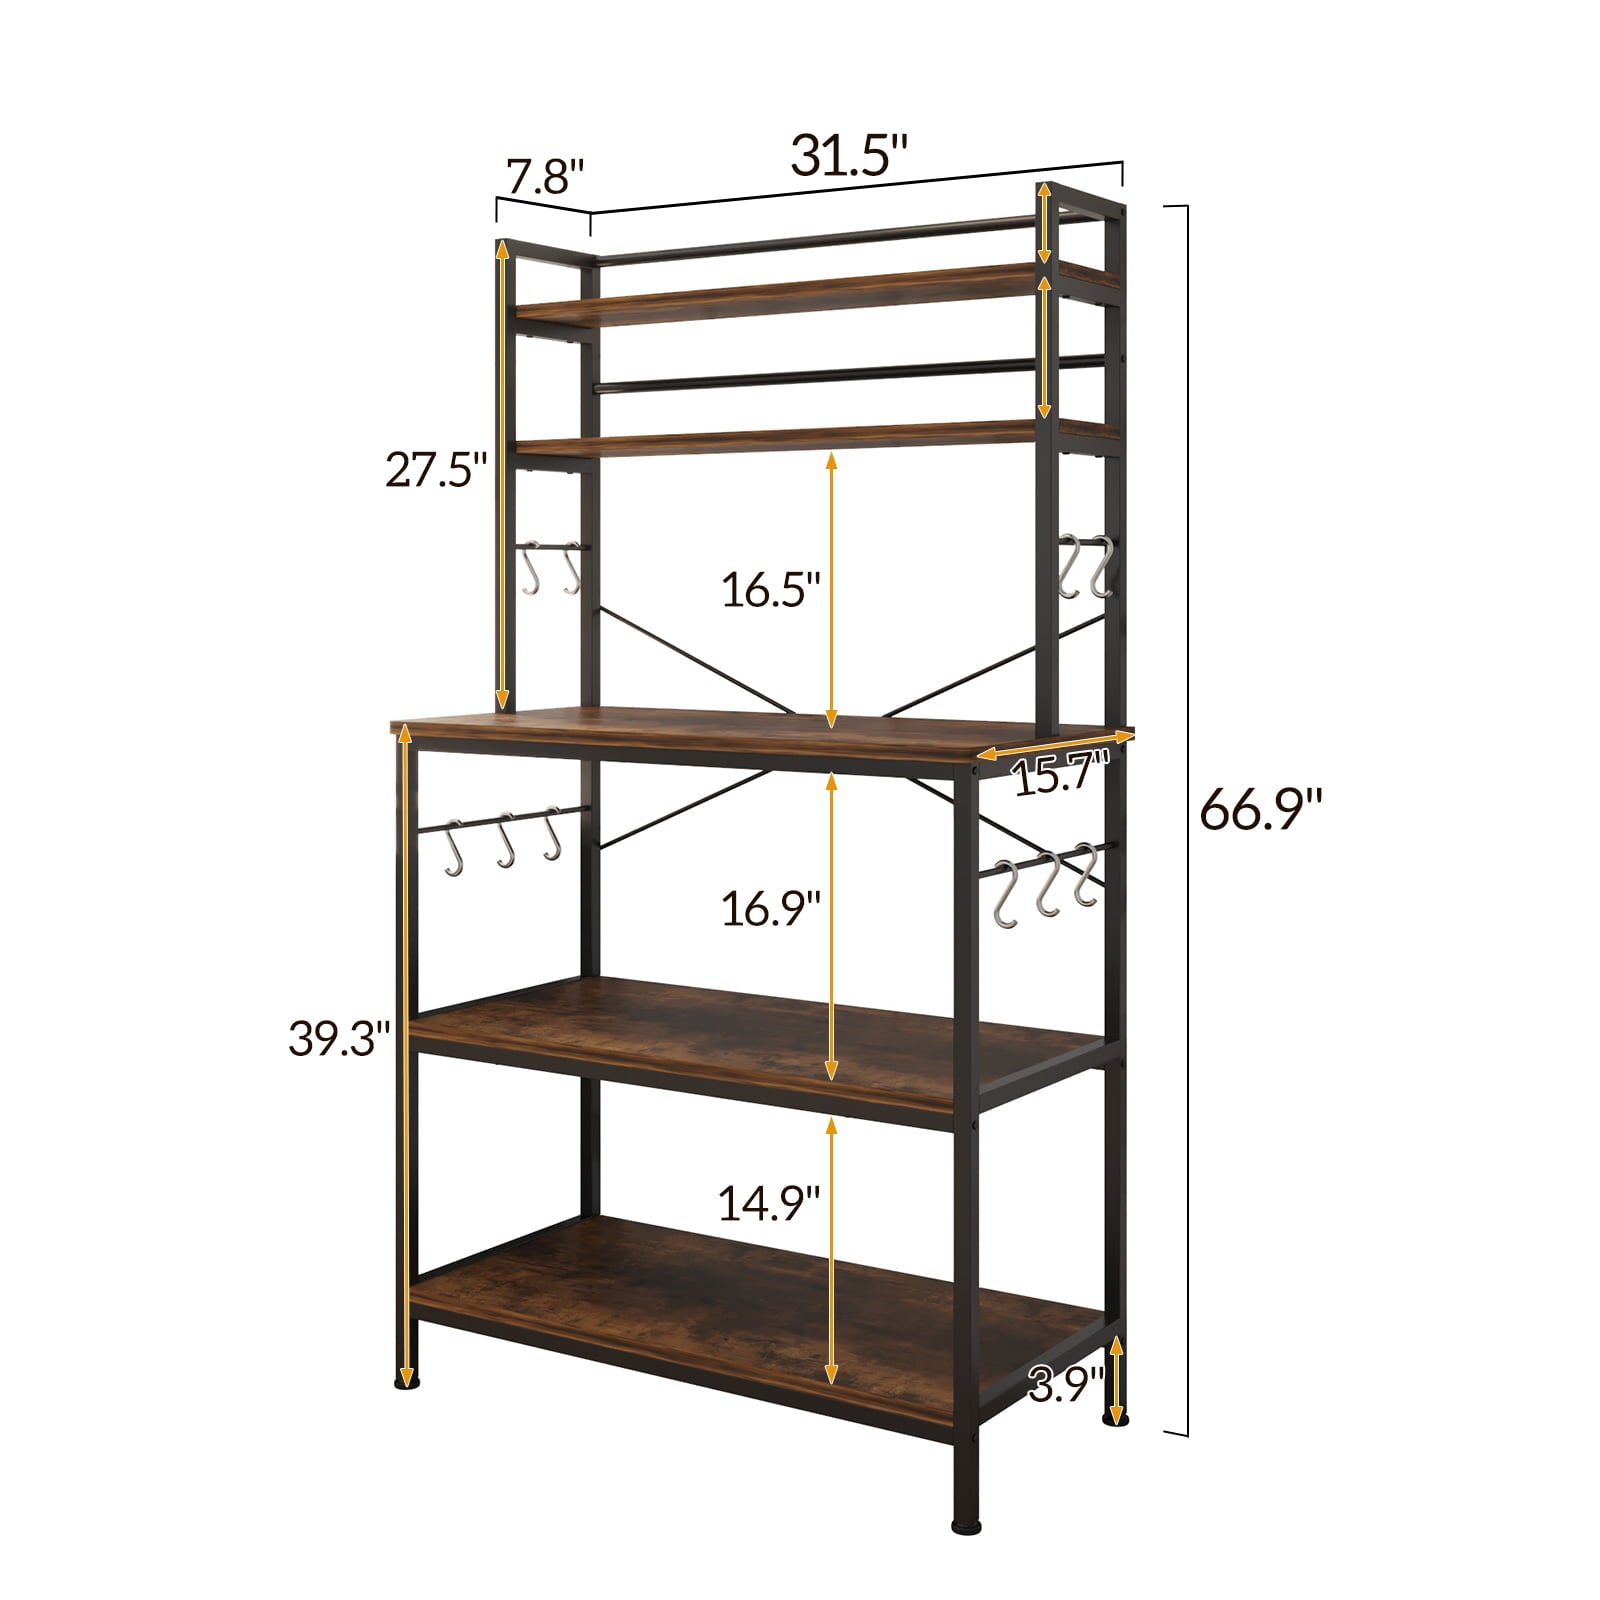 Ktaxon 5-Tier Kitchen Baker's Rack with 10 Hooks， Industrial Microwave Oven Stand Kitchen Island Cart Storage Shelving Unit Organizer， Rustic Brown